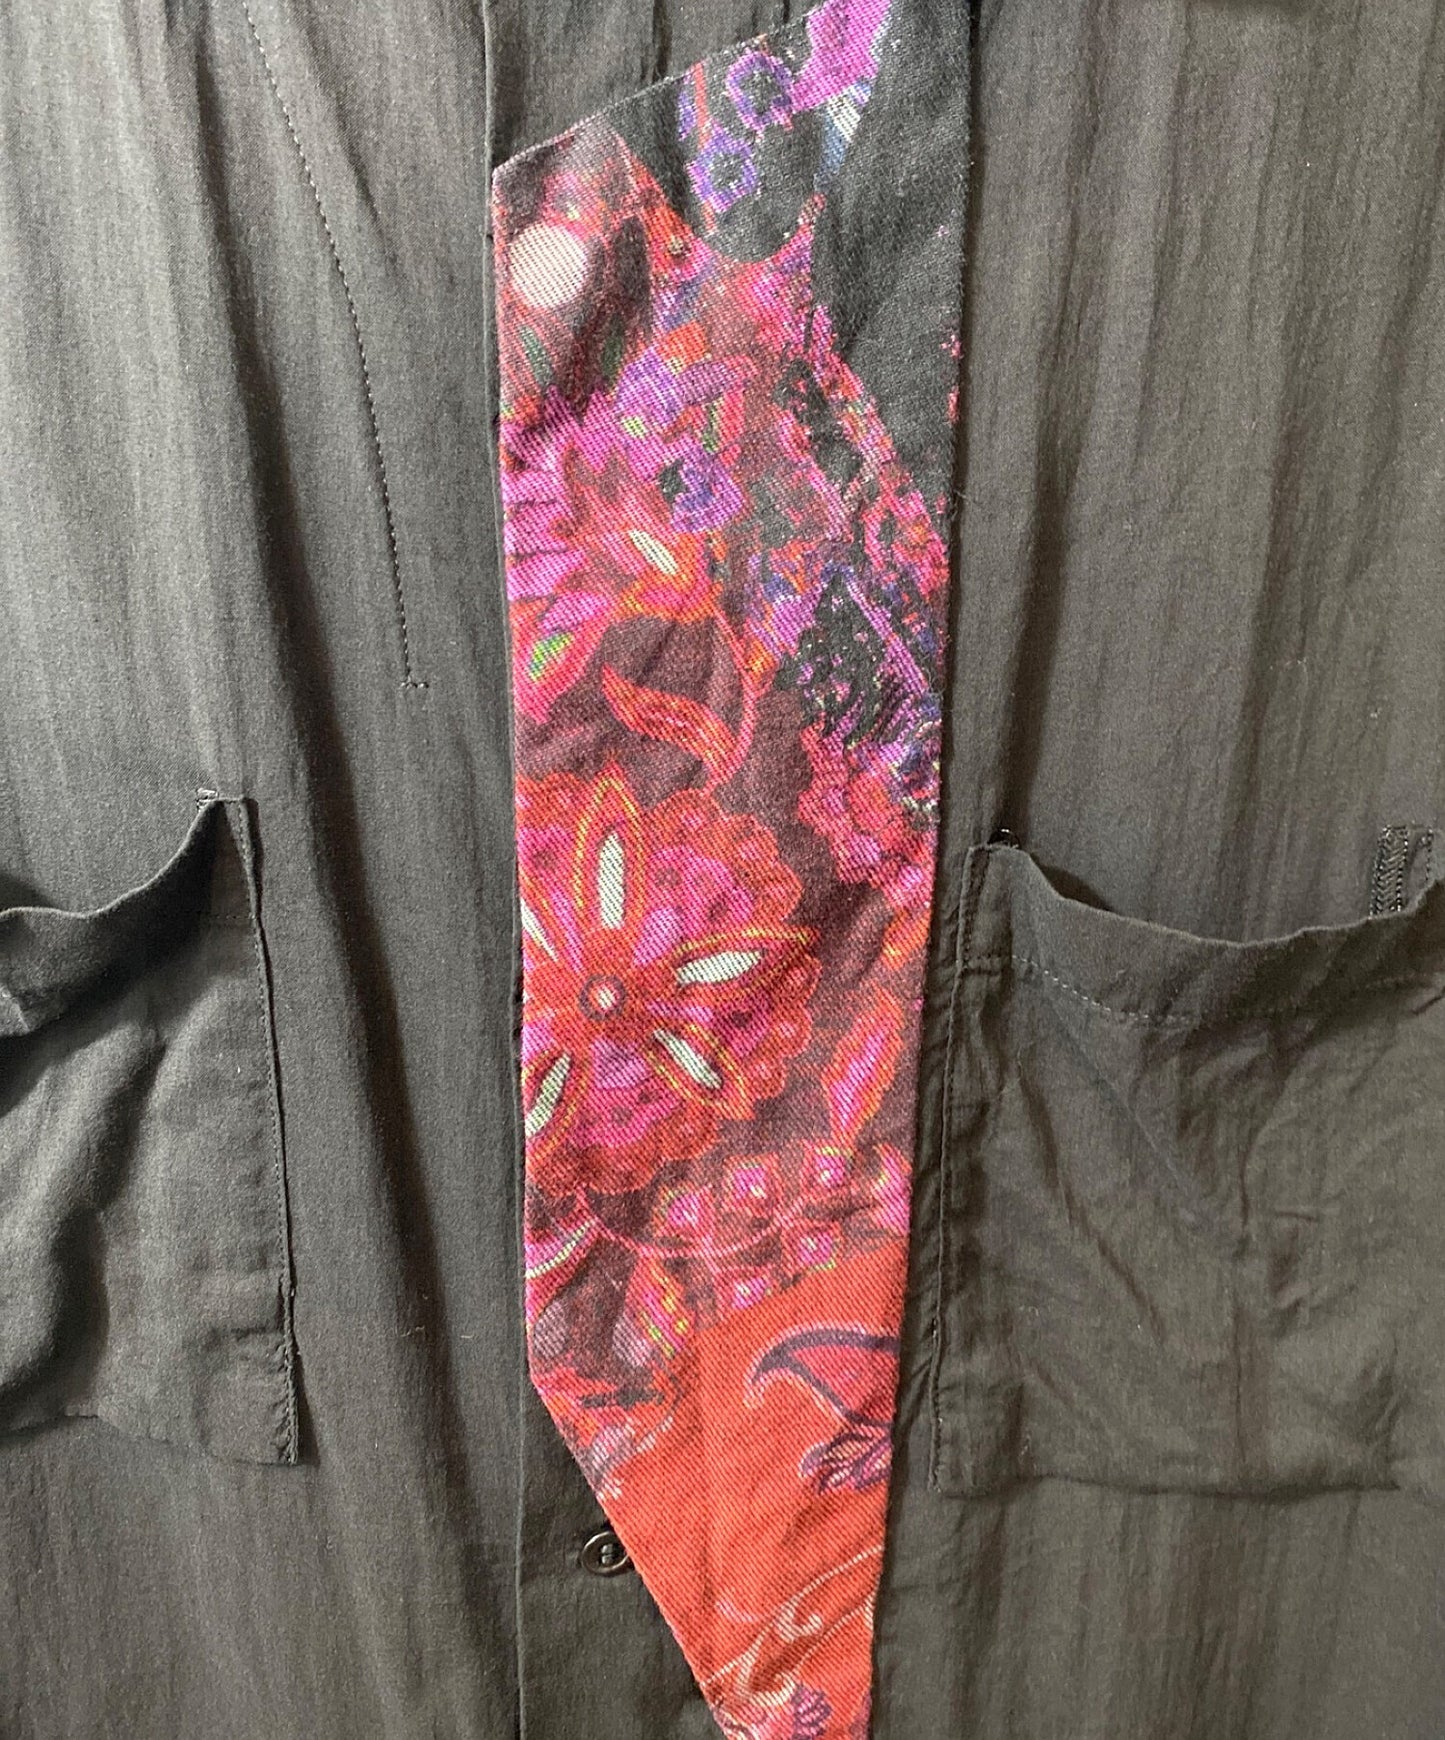 [Pre-owned] Yohji Yamamoto pour homme 23SS pour homme Cylindrical sleeves front patch fabric B HZ-B16-212